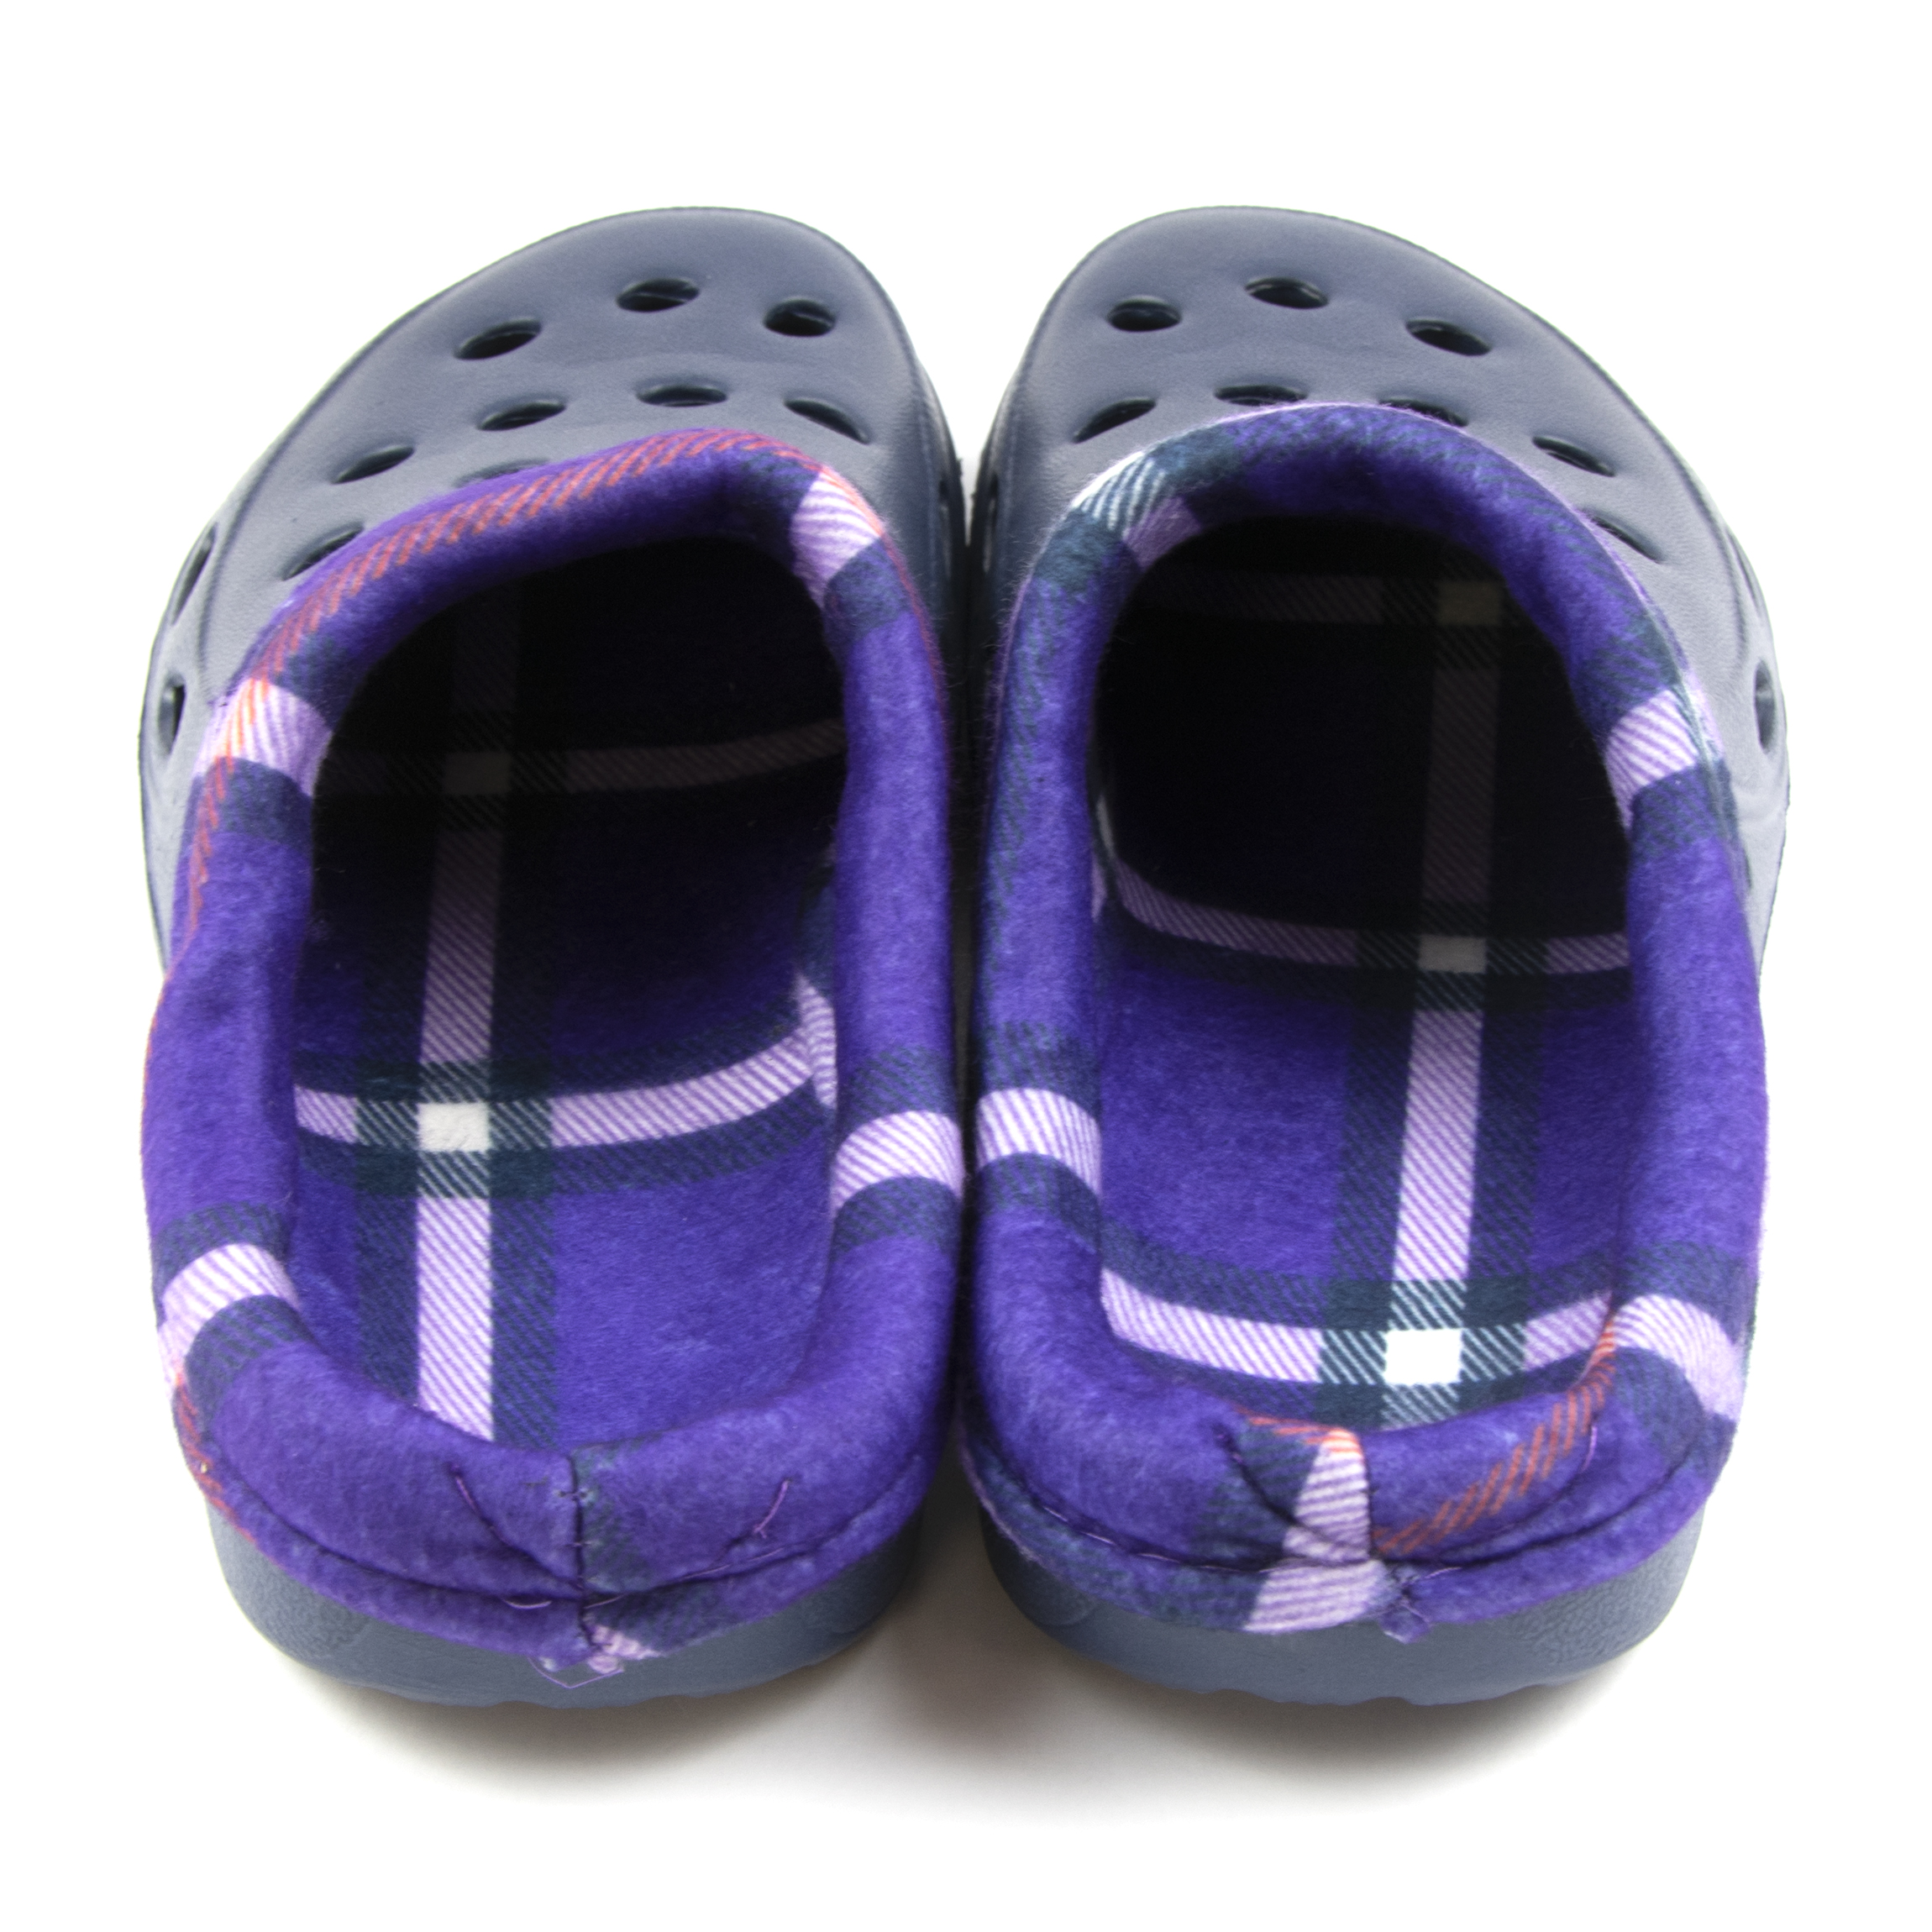 Gold Coast Women's Purple and White Plaid Fleece Lined Clogs in Navy, Size 7